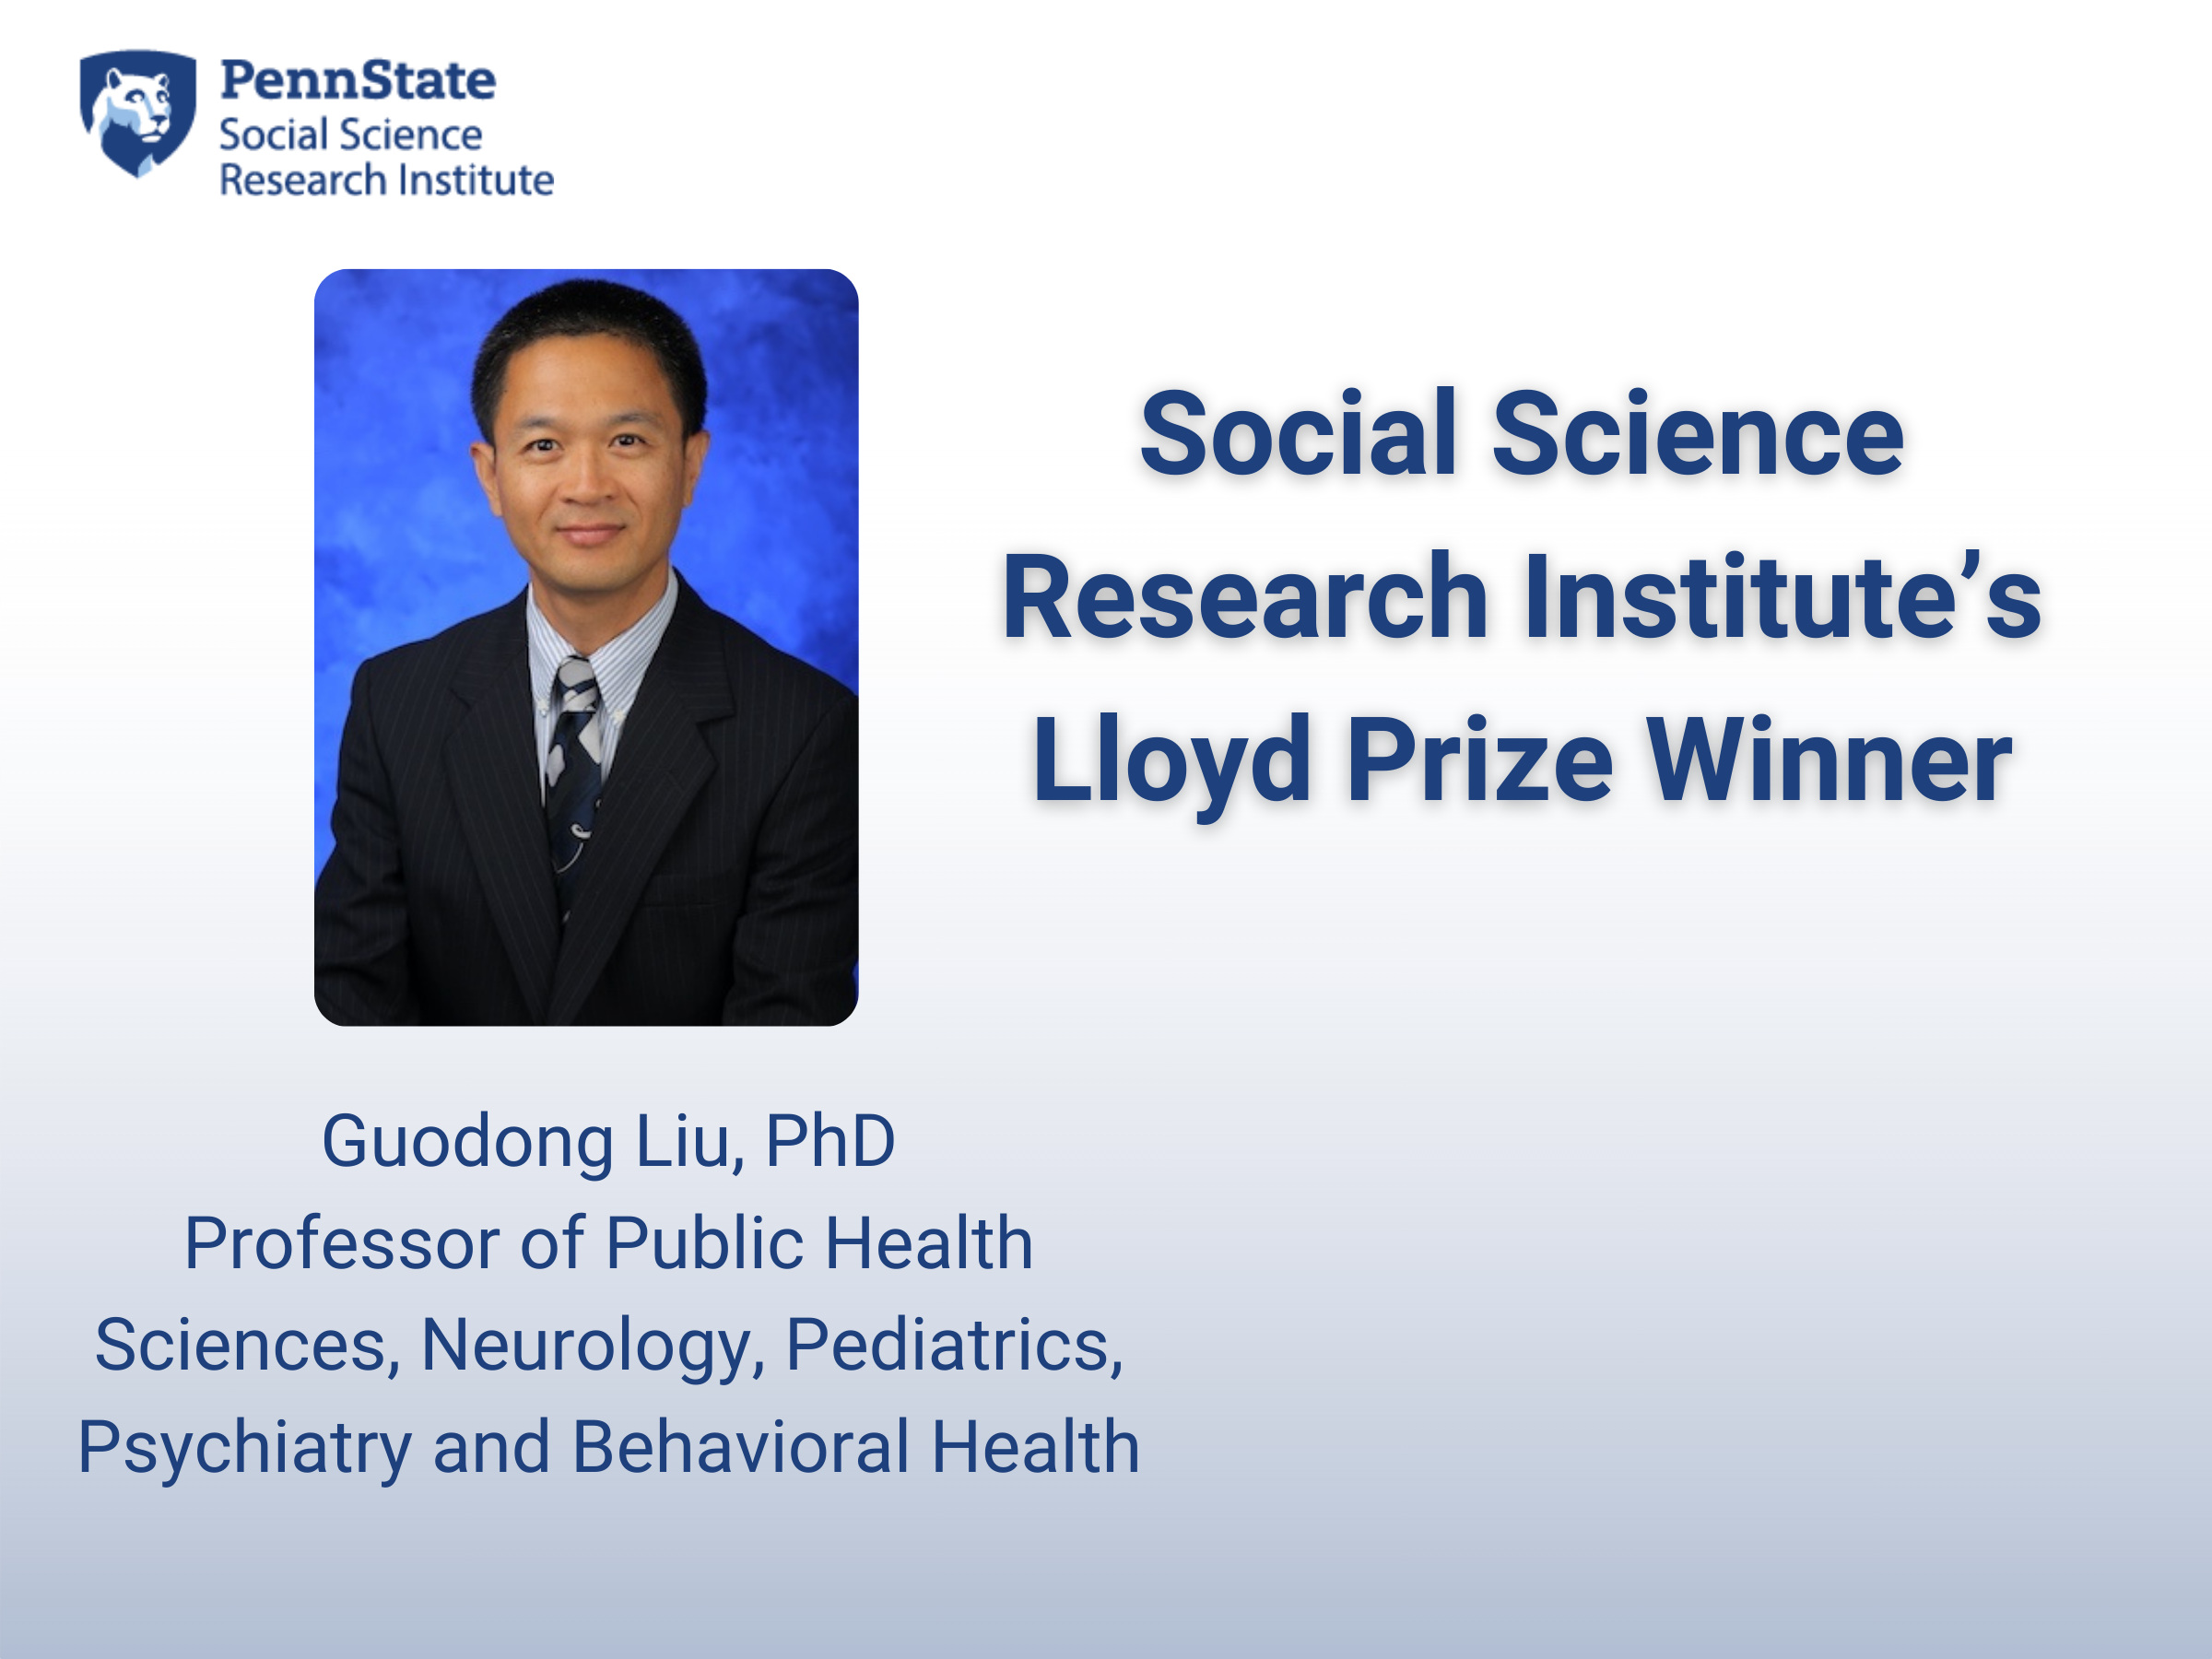 White graphic with blue gradient depicts Guodong Liu, an Asian man in a dark suit, as the winner of SSRI's Lloyd Prize.